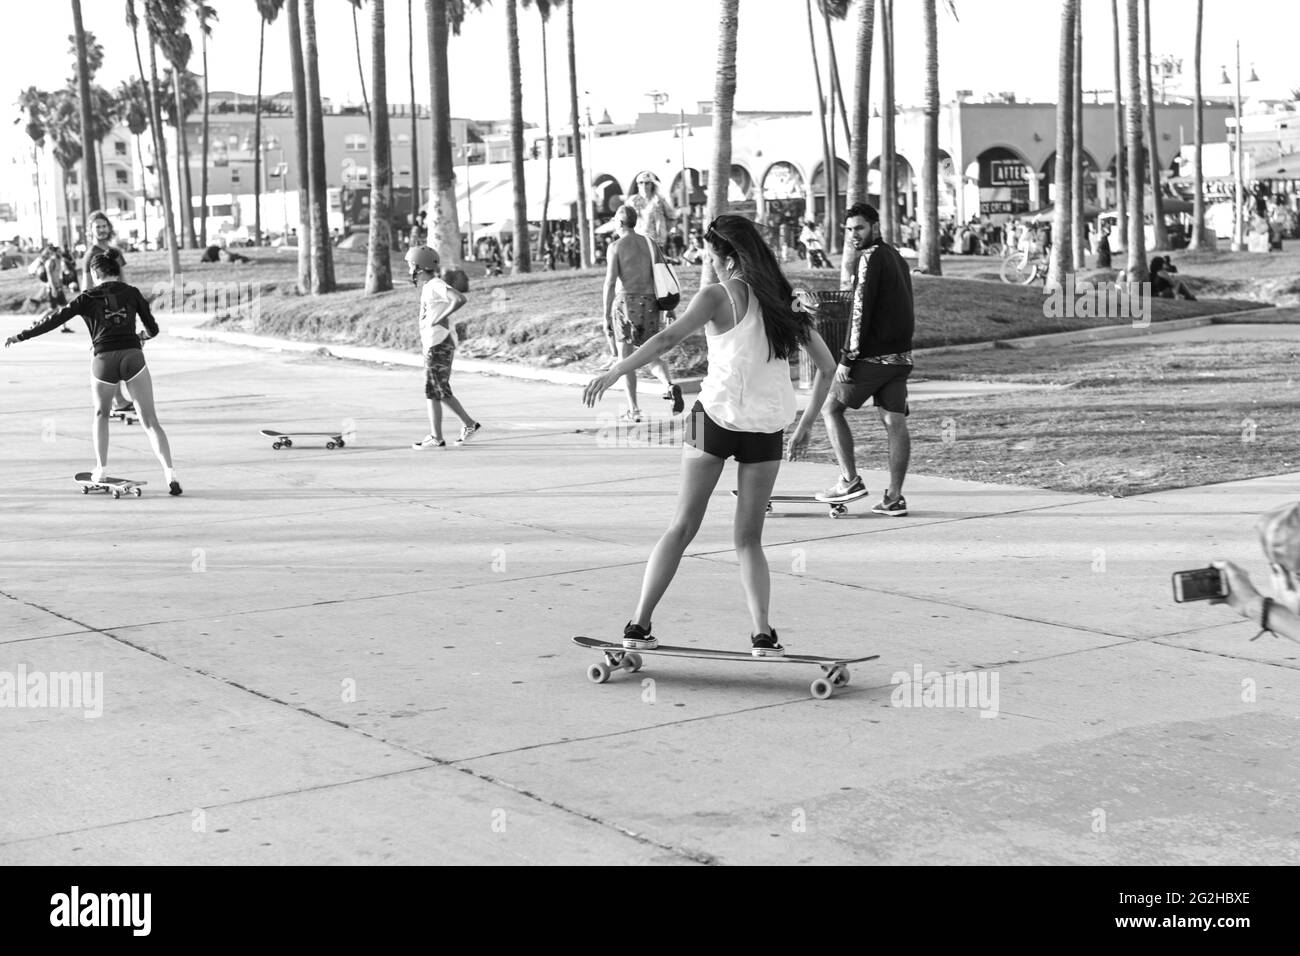 Skaters and the skate lifestyle in Venice Beach in Los Angeles, California, USA Stock Photo